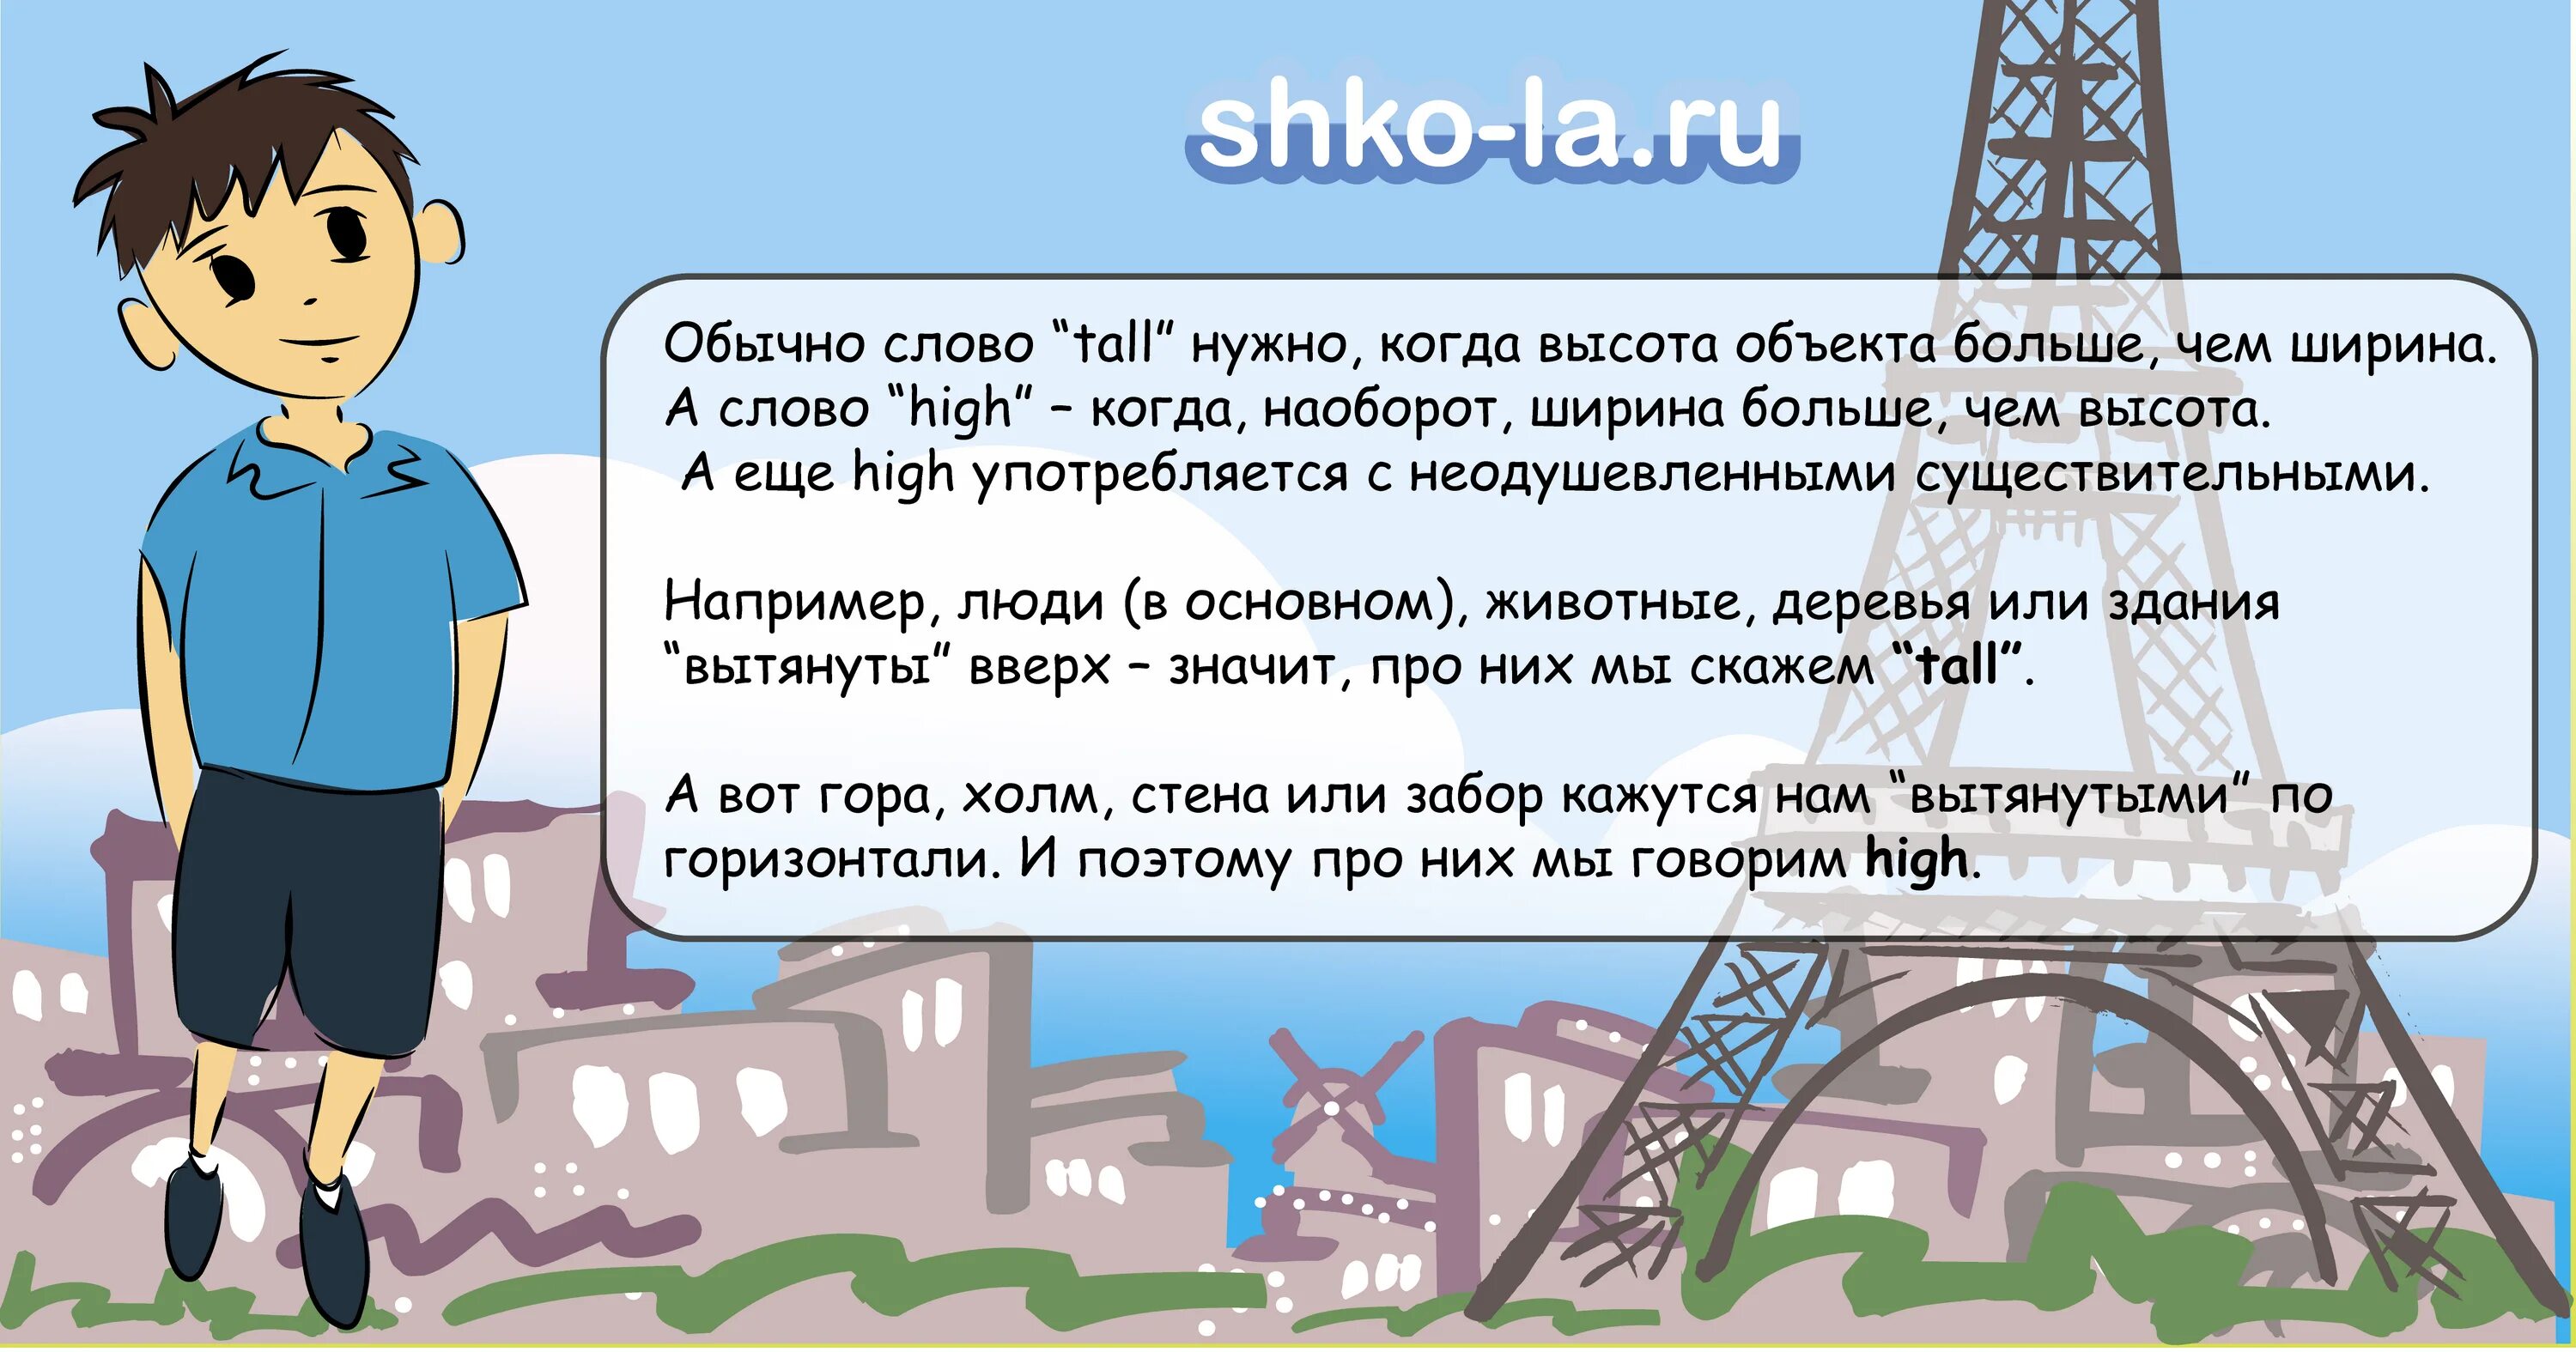 Tall на русском языке. Tall High правило. Разница между Tall и High. Разница между High и Tall в английском языке. Tall High разница правило.